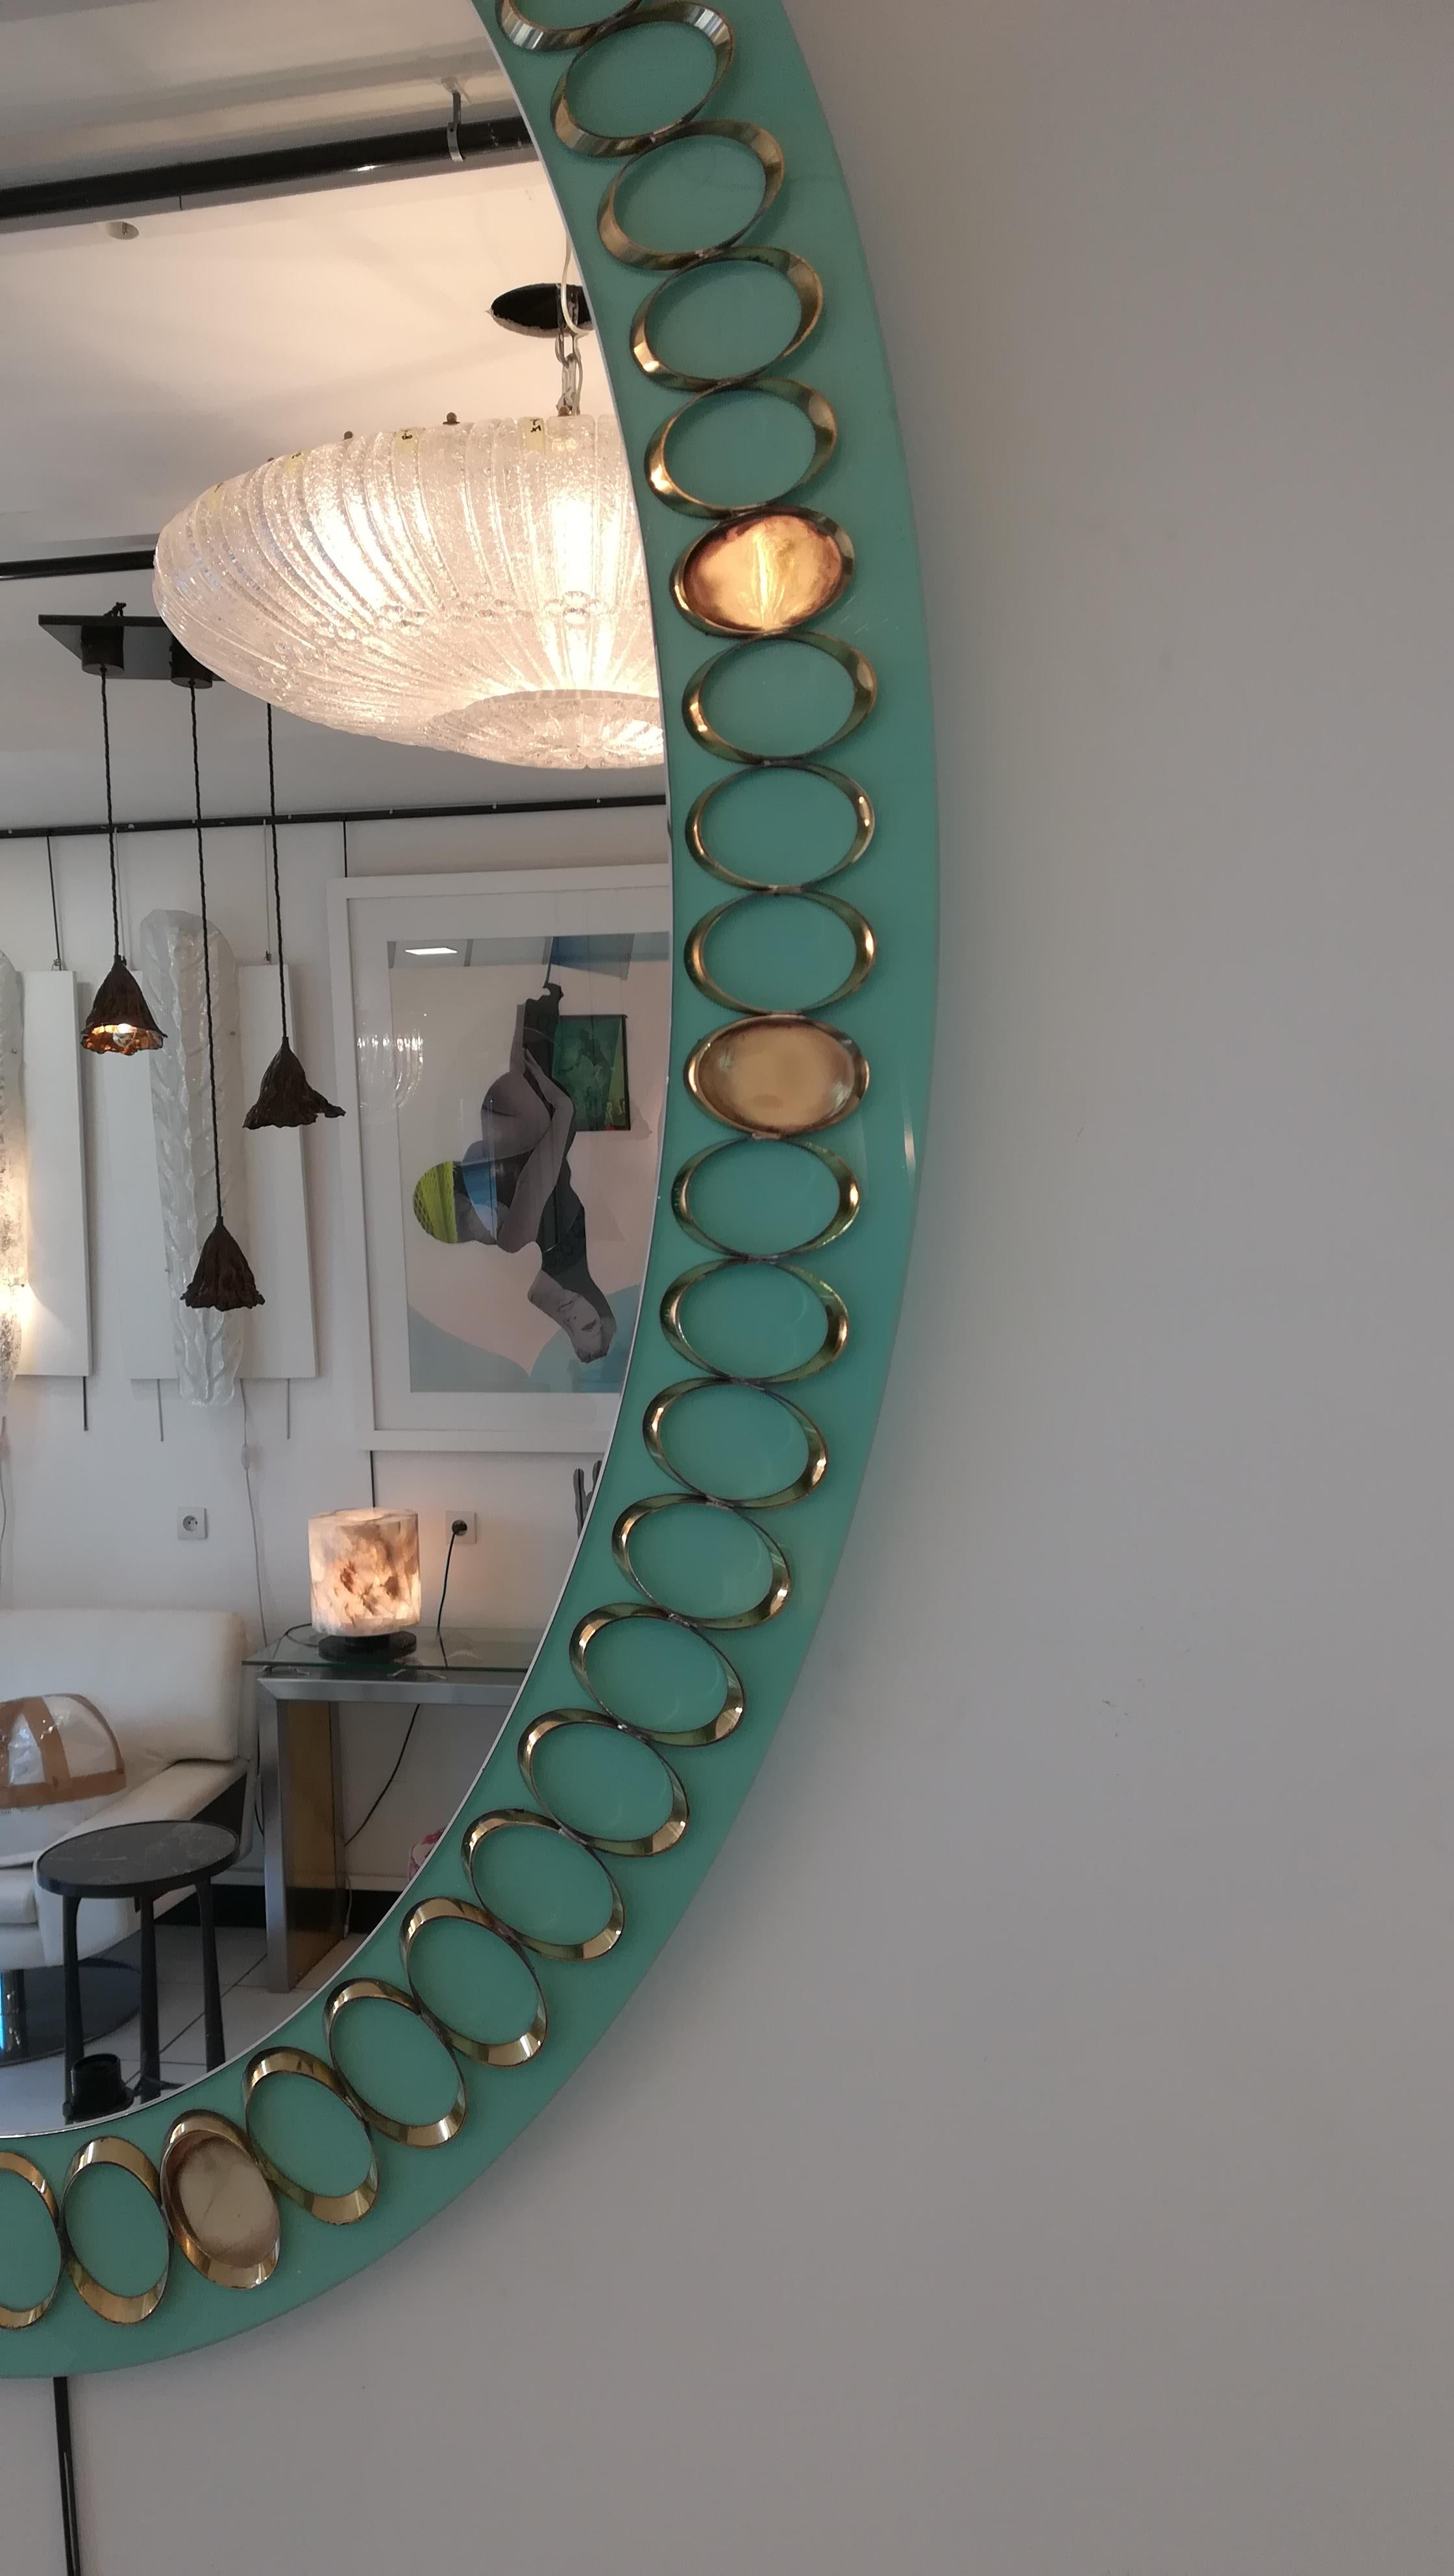 1950s Italian opaline glass and brass mirrors, in perfect condition (two pieces).